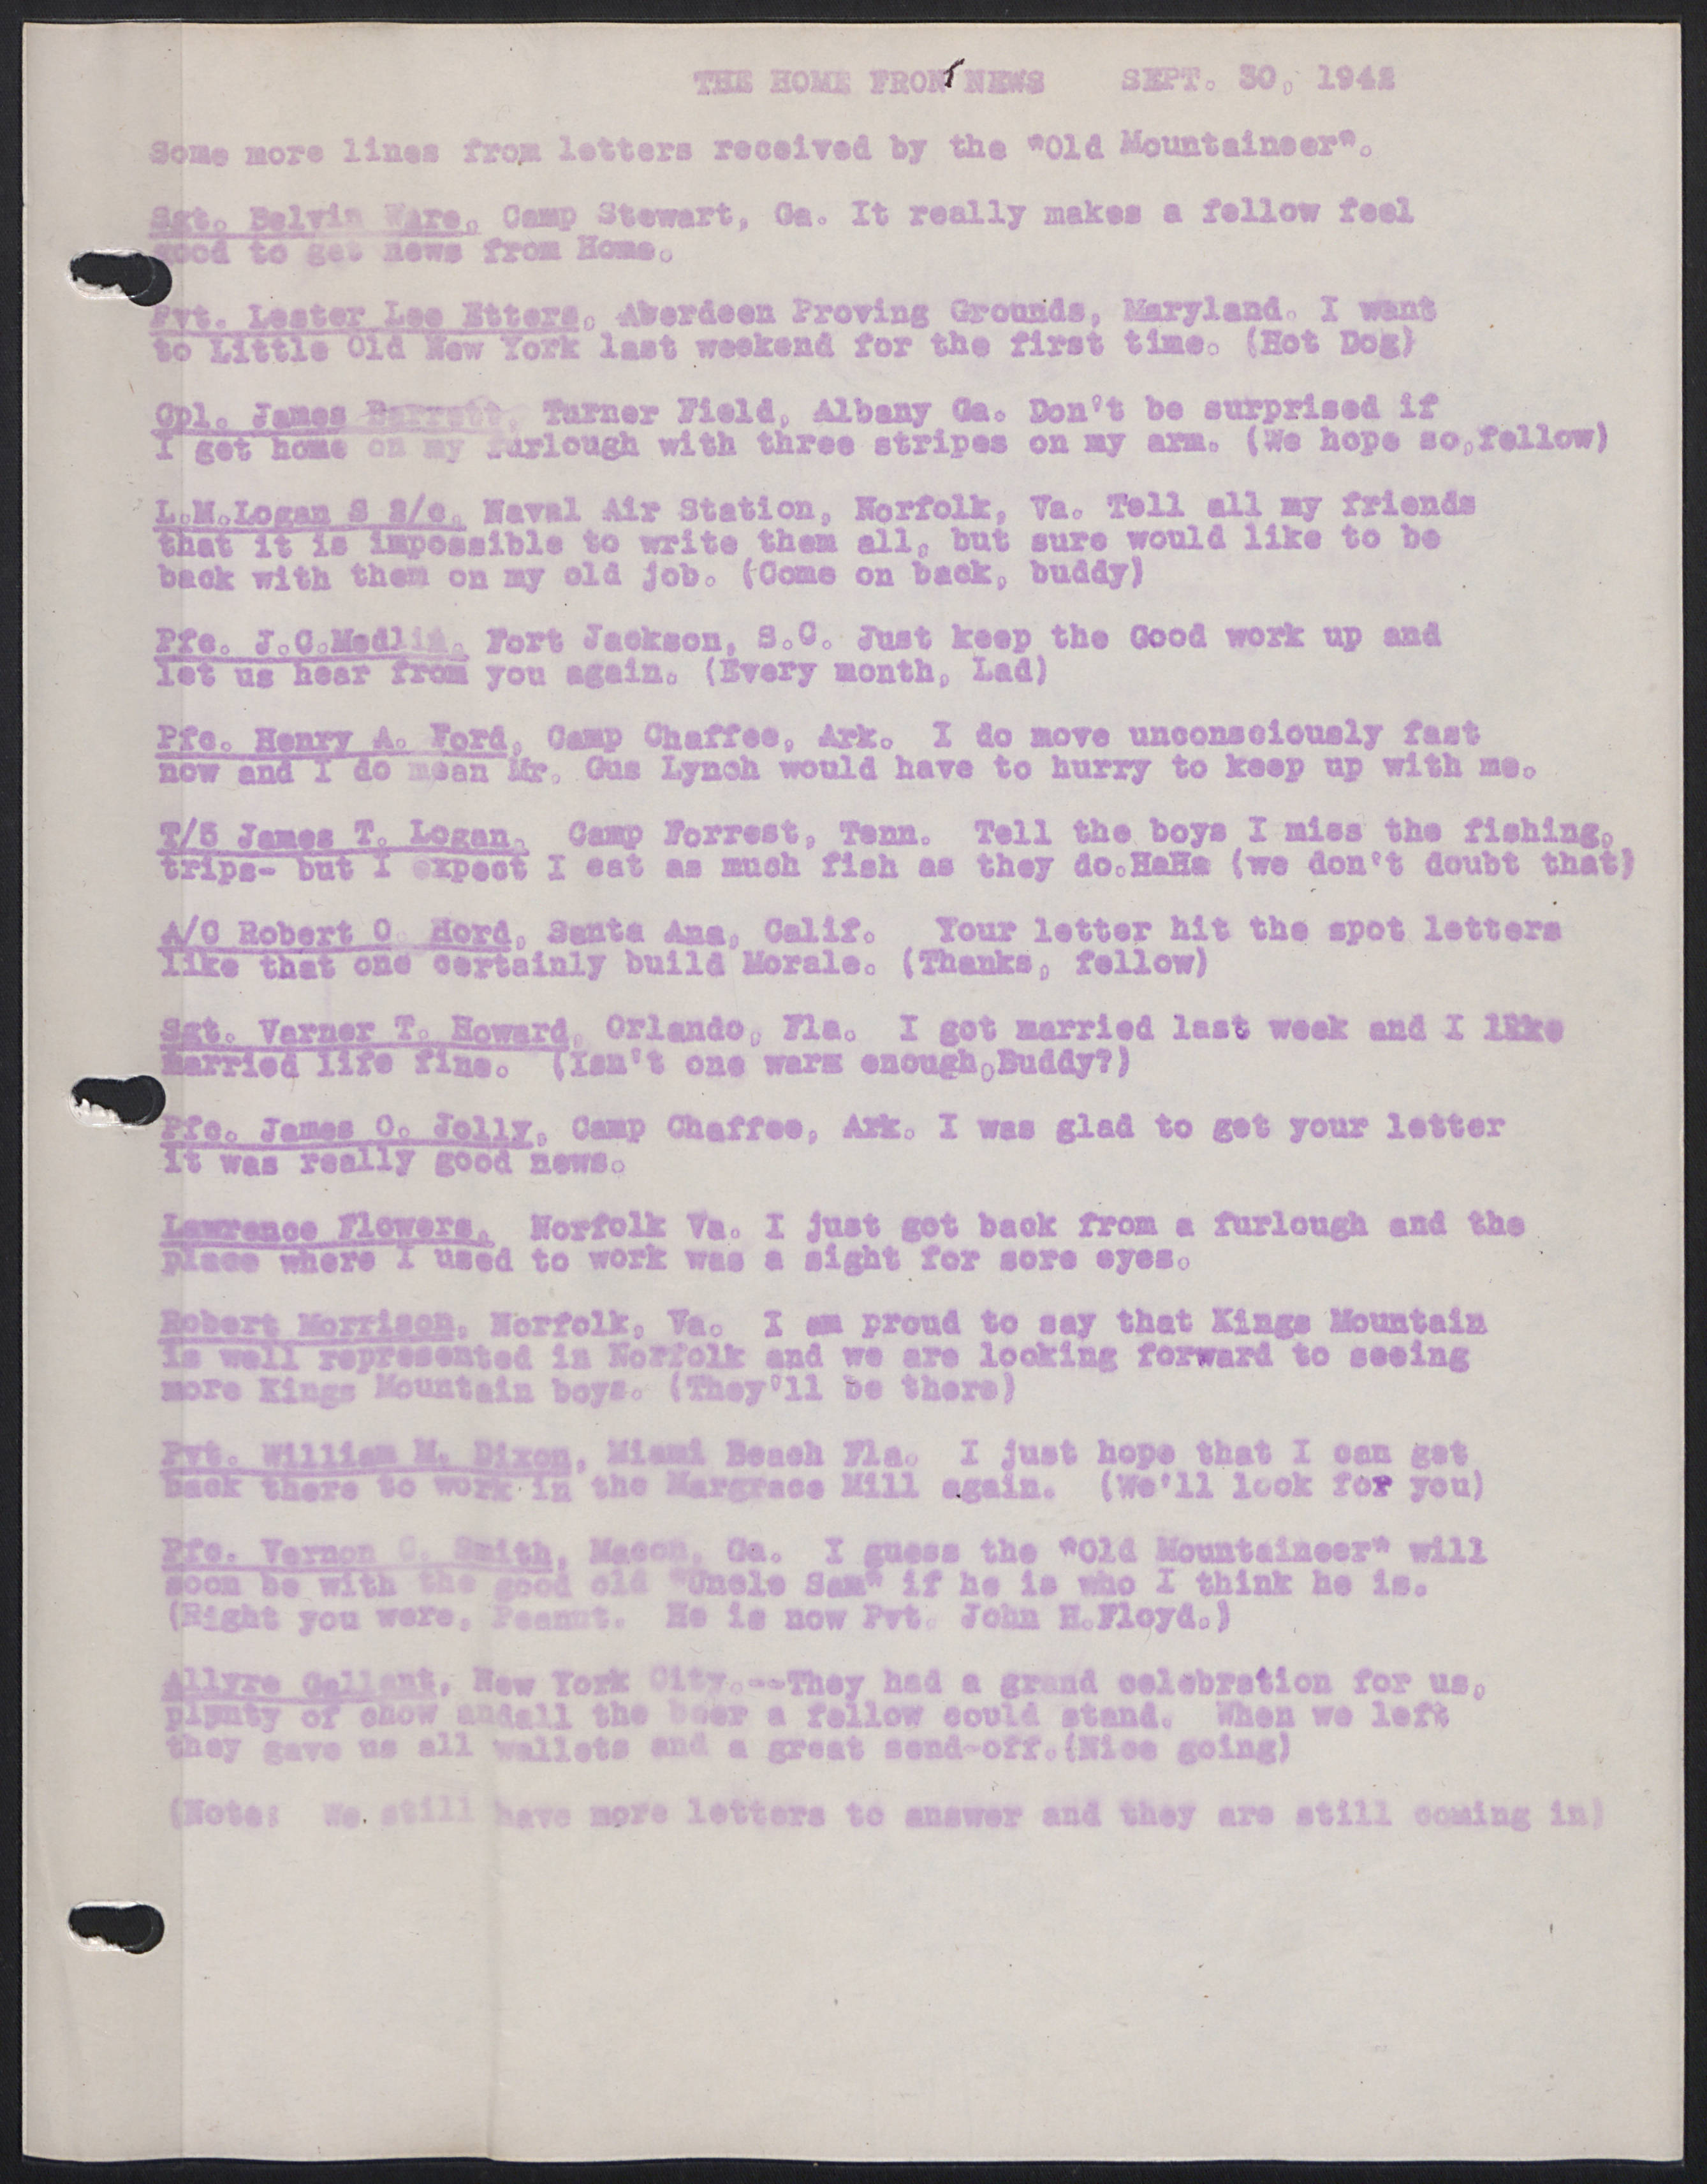 The Old Mountaineer Letters to Servicemen page 13